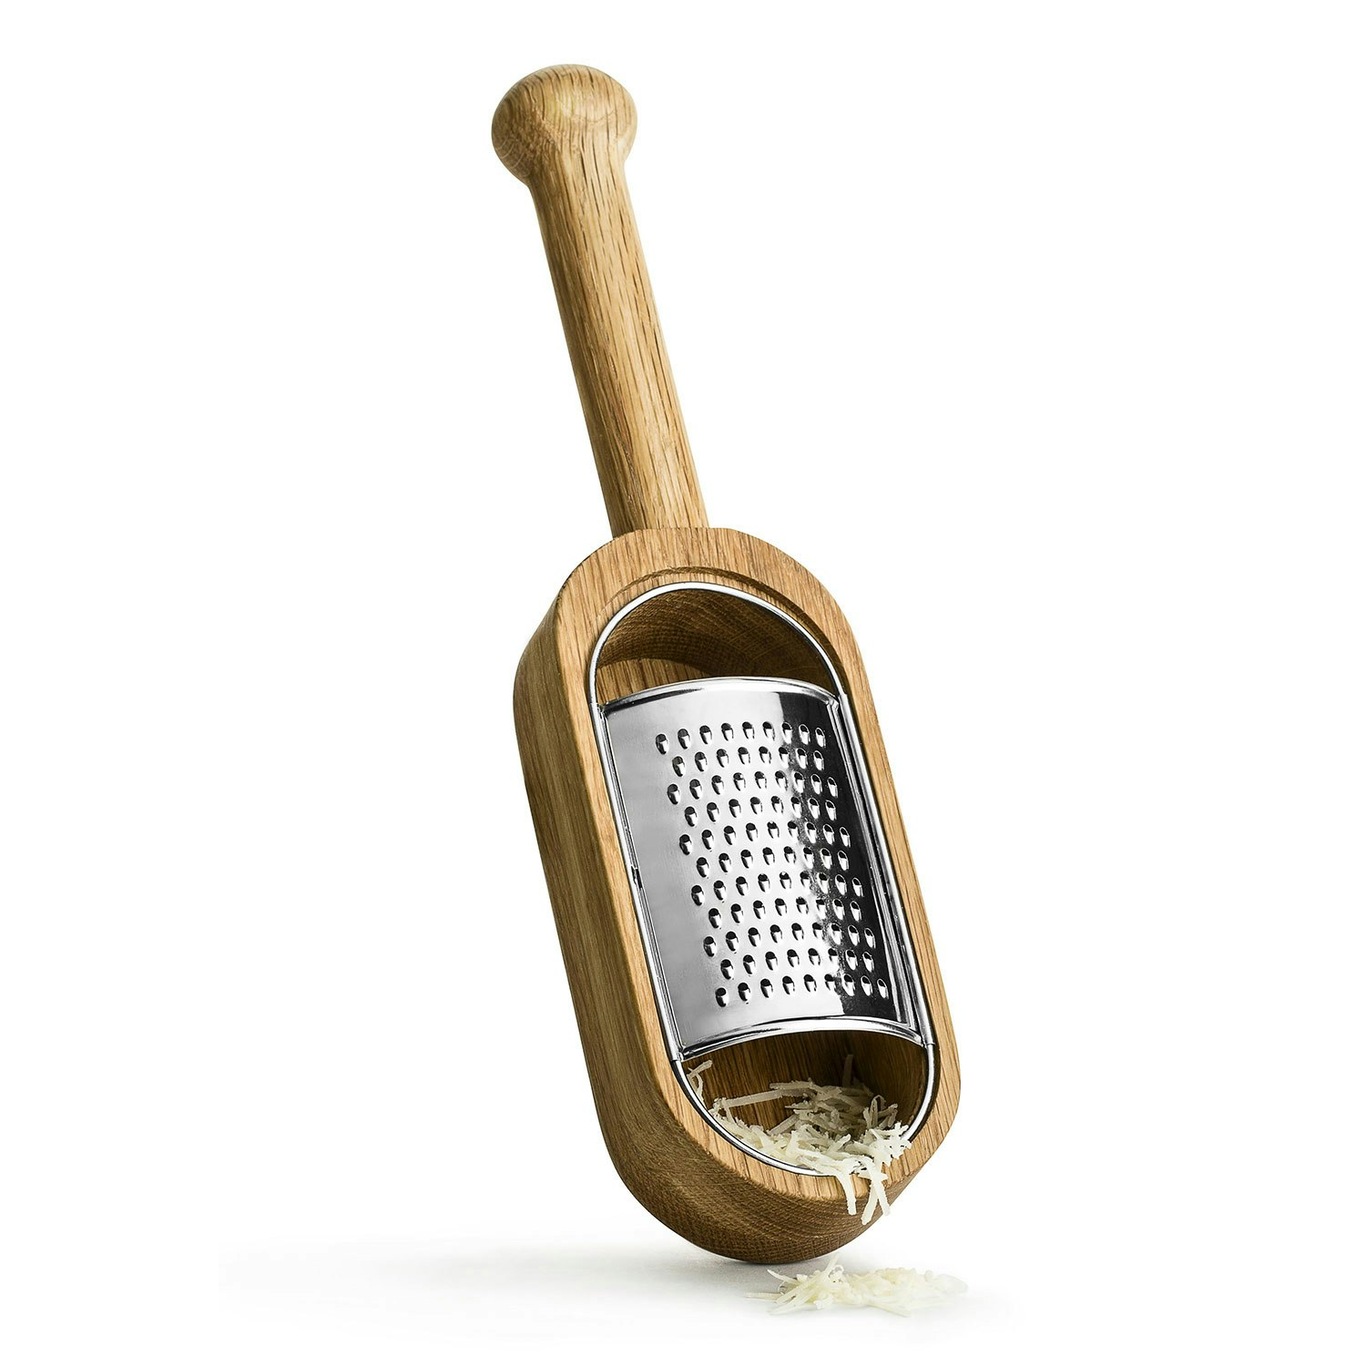 Cheese Graters